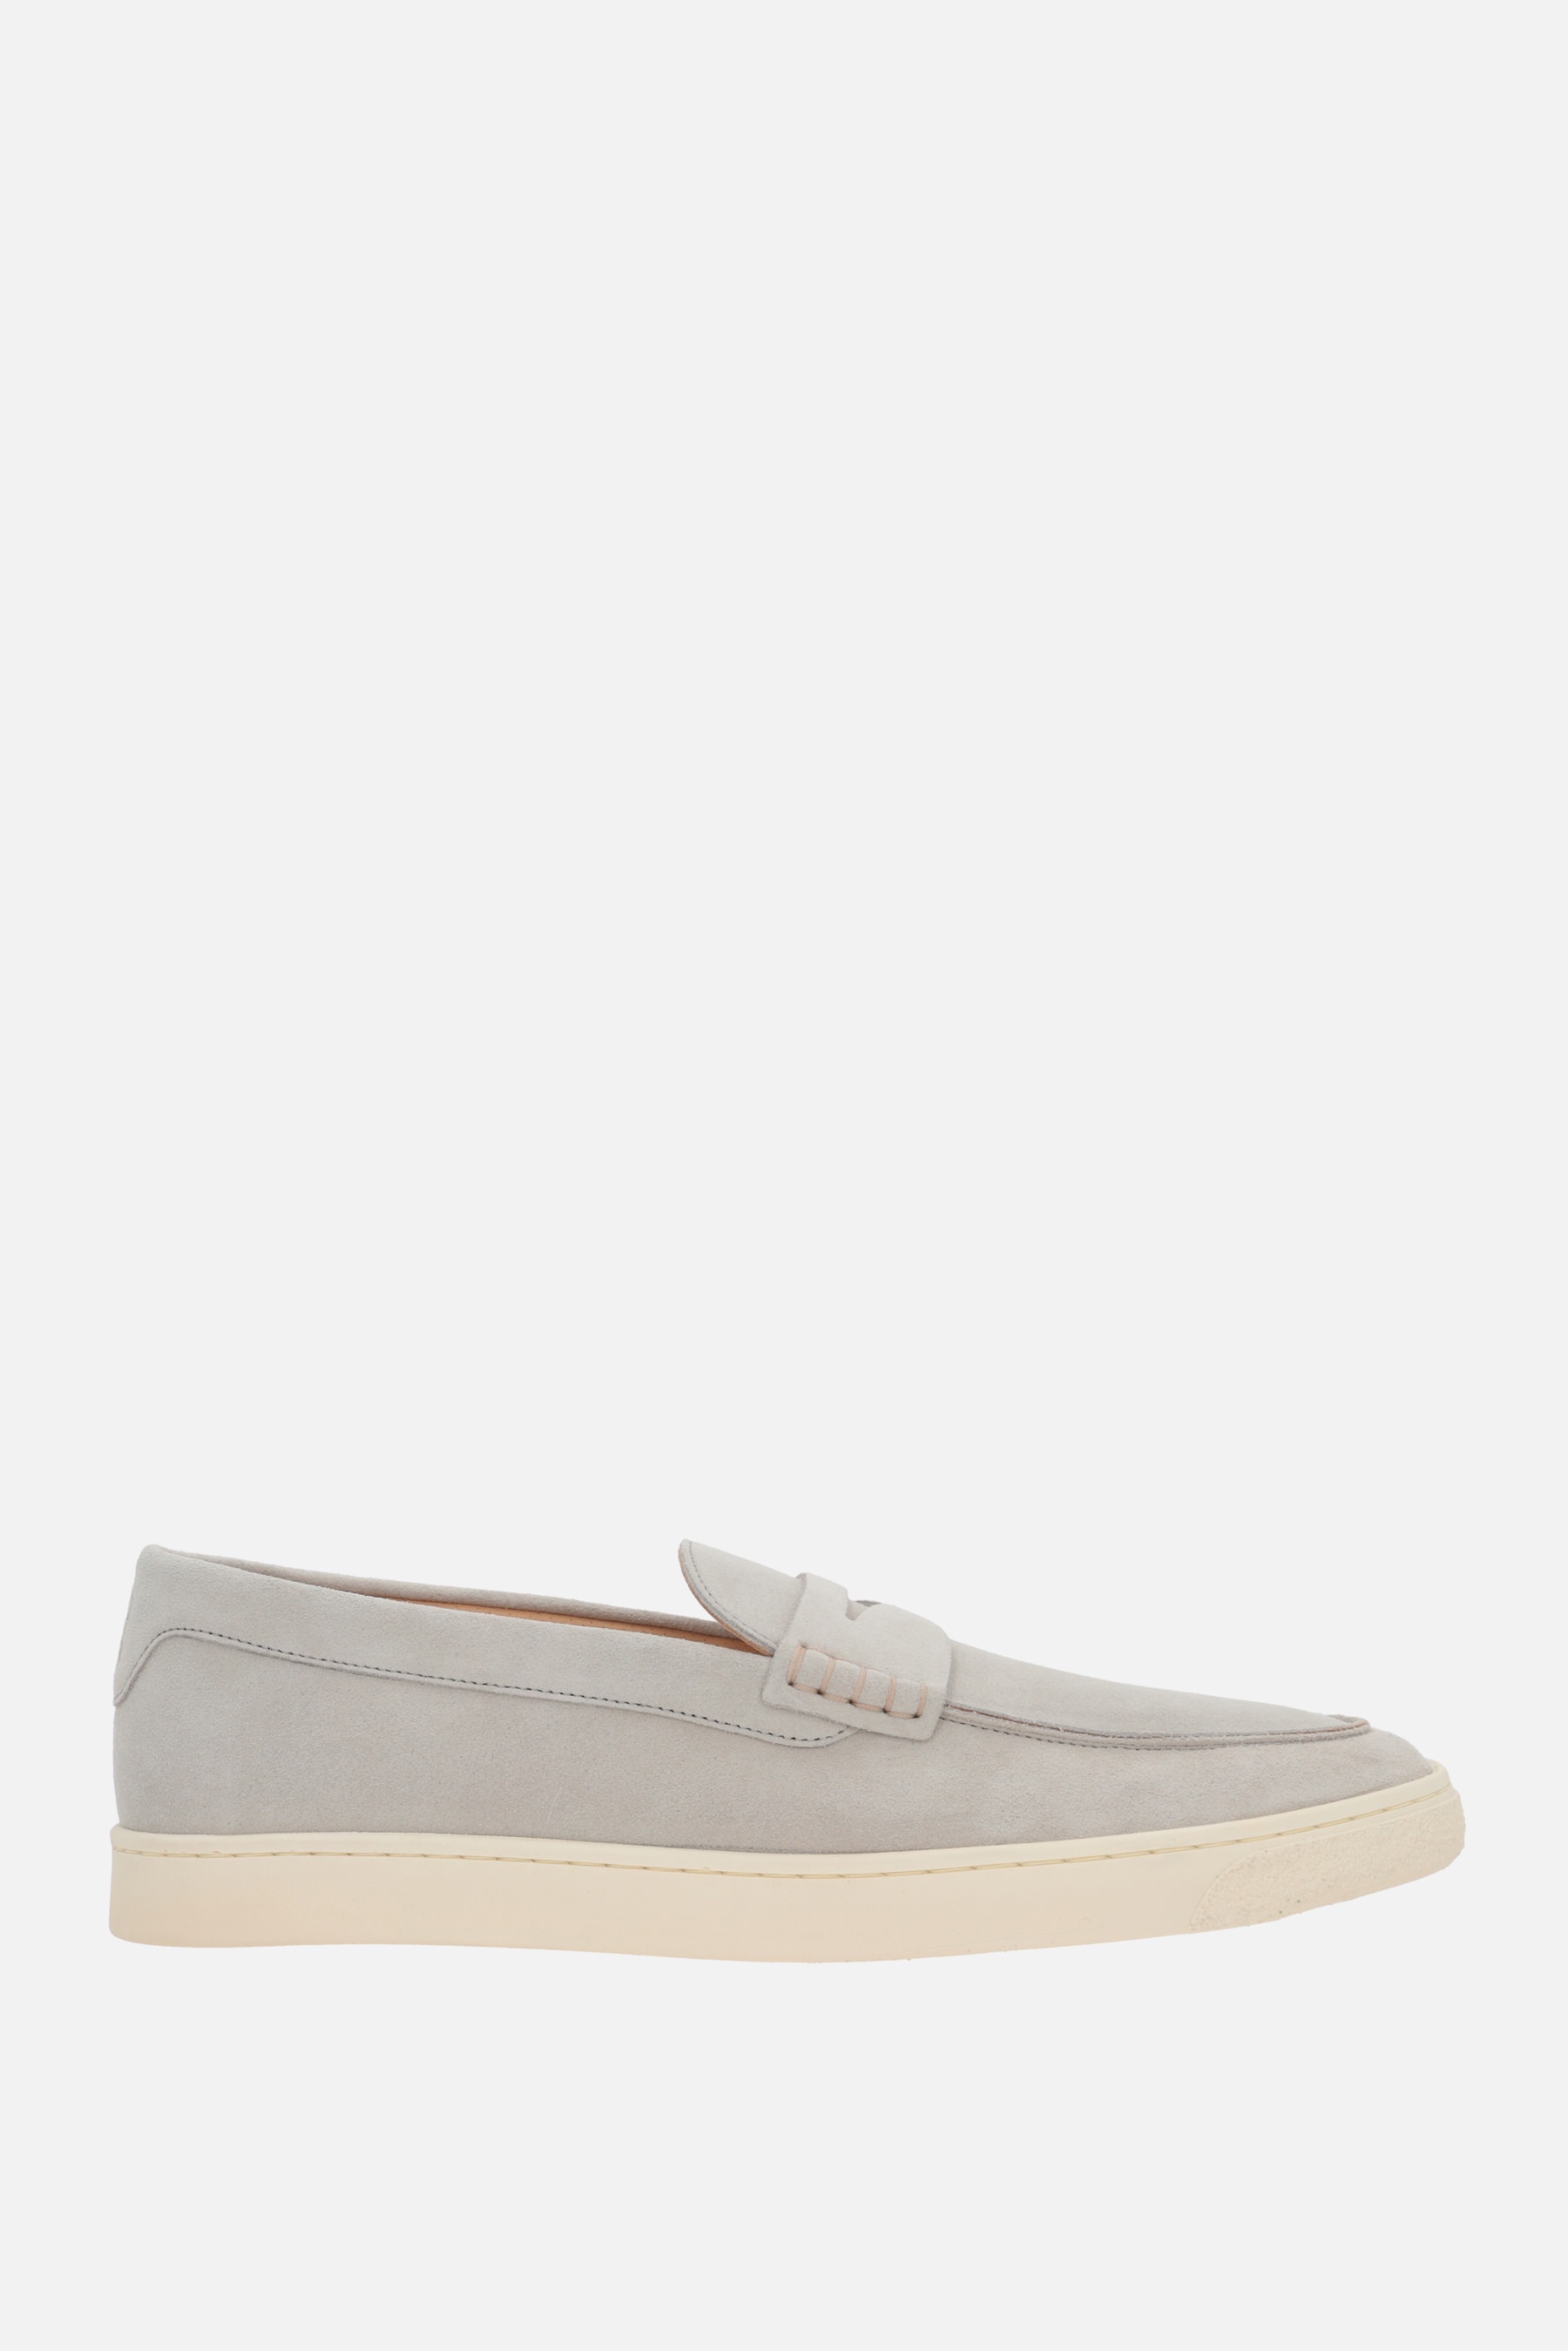 SUEDE LOAFERS - 1